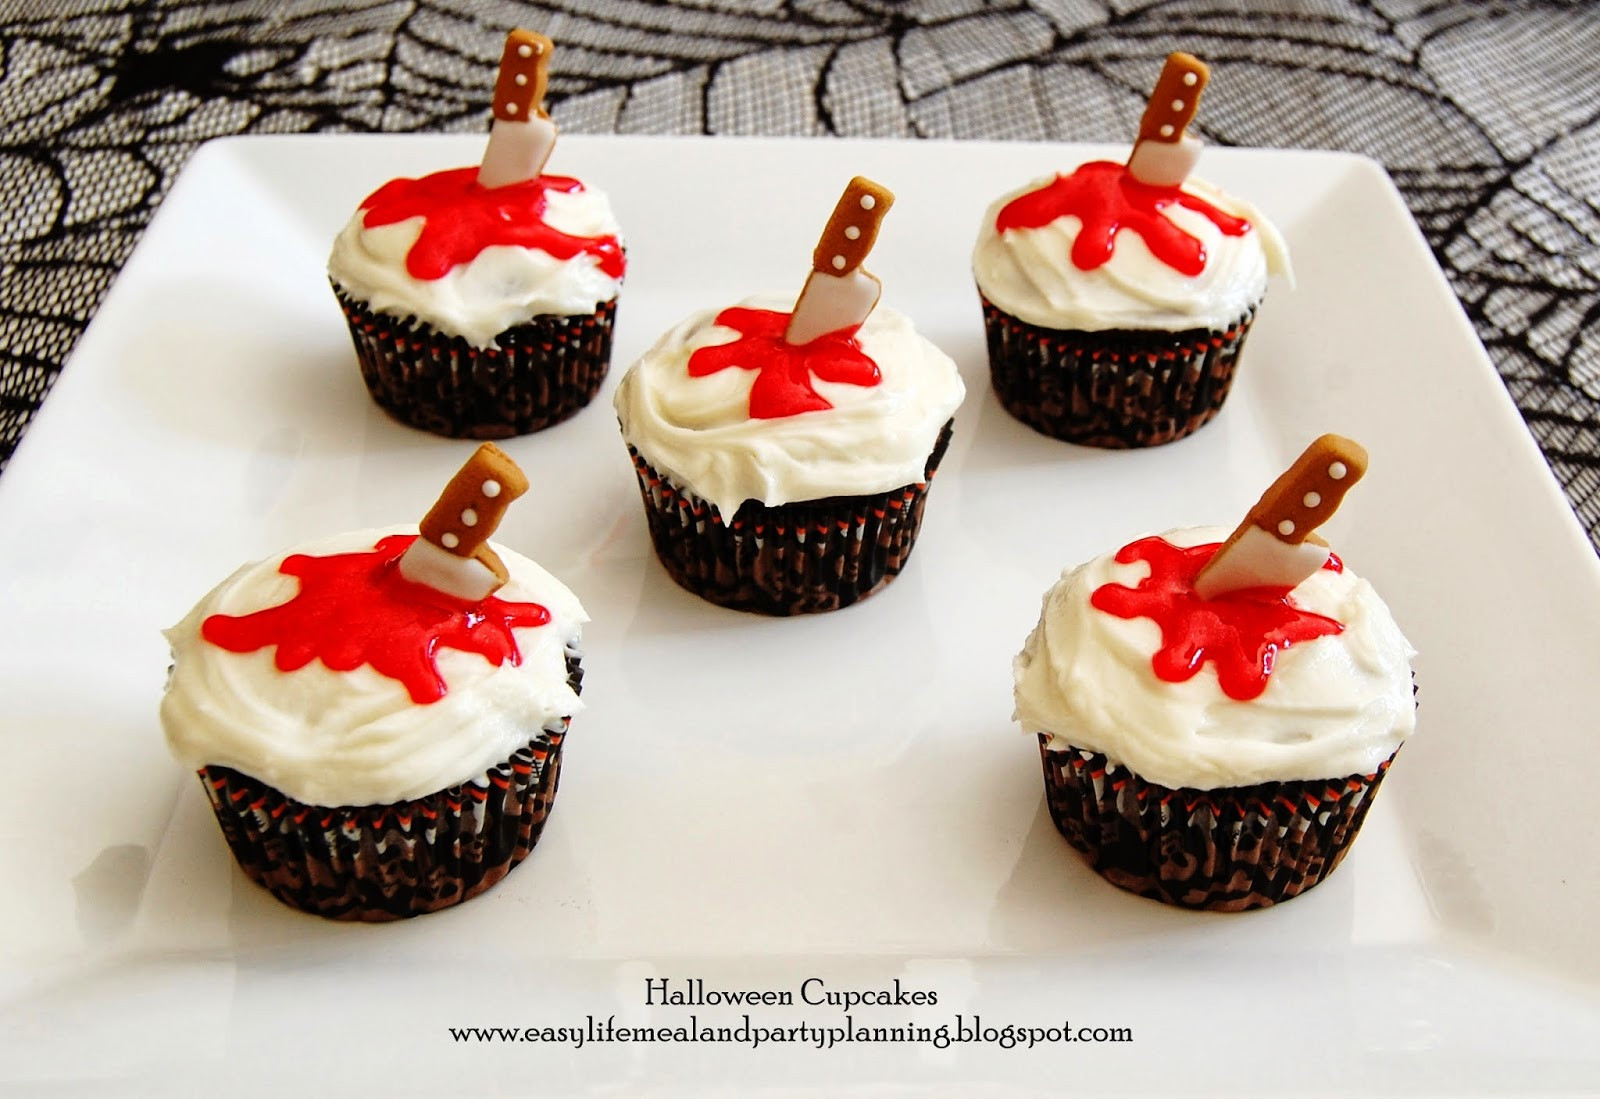 Halloween Decorating Cupcakes
 Easy Life Meal and Party Planning October 2013